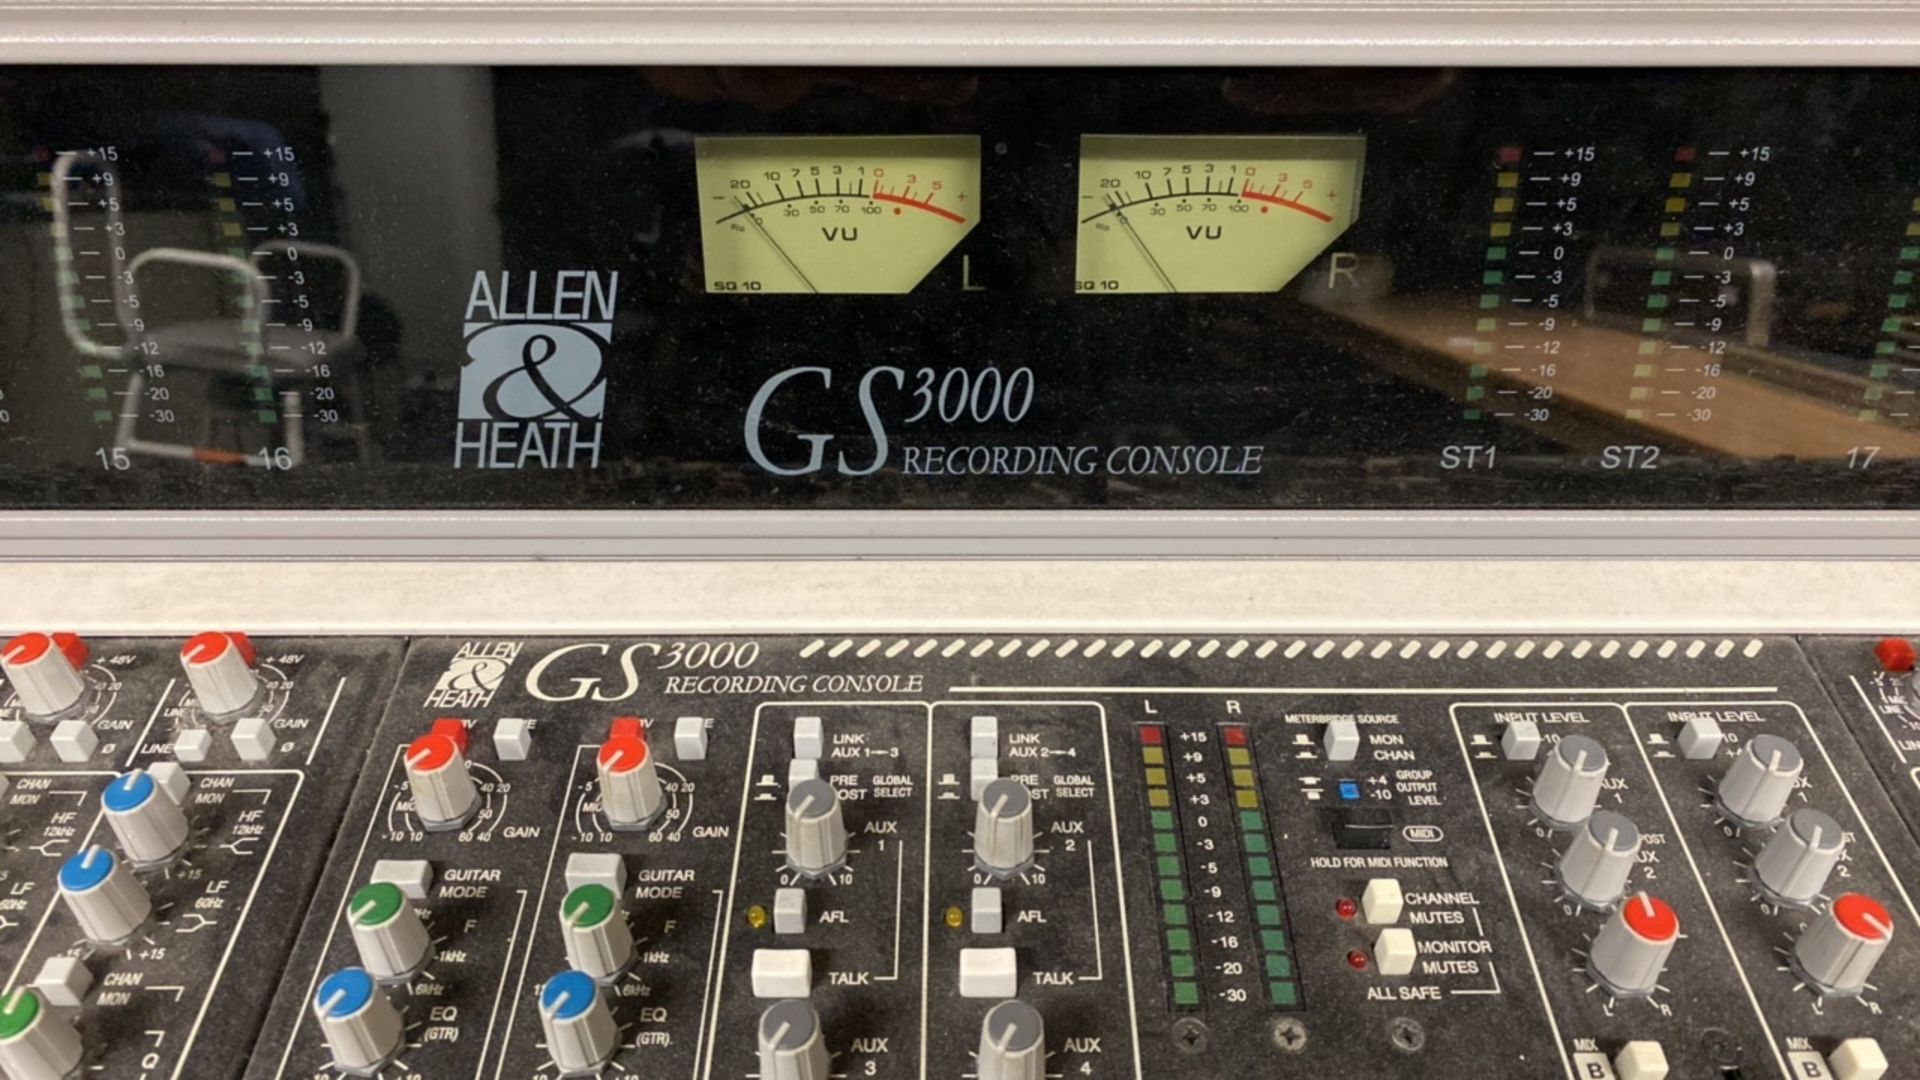 Allen and Heath GS3000 Recording Console Mixer - Image 3 of 8